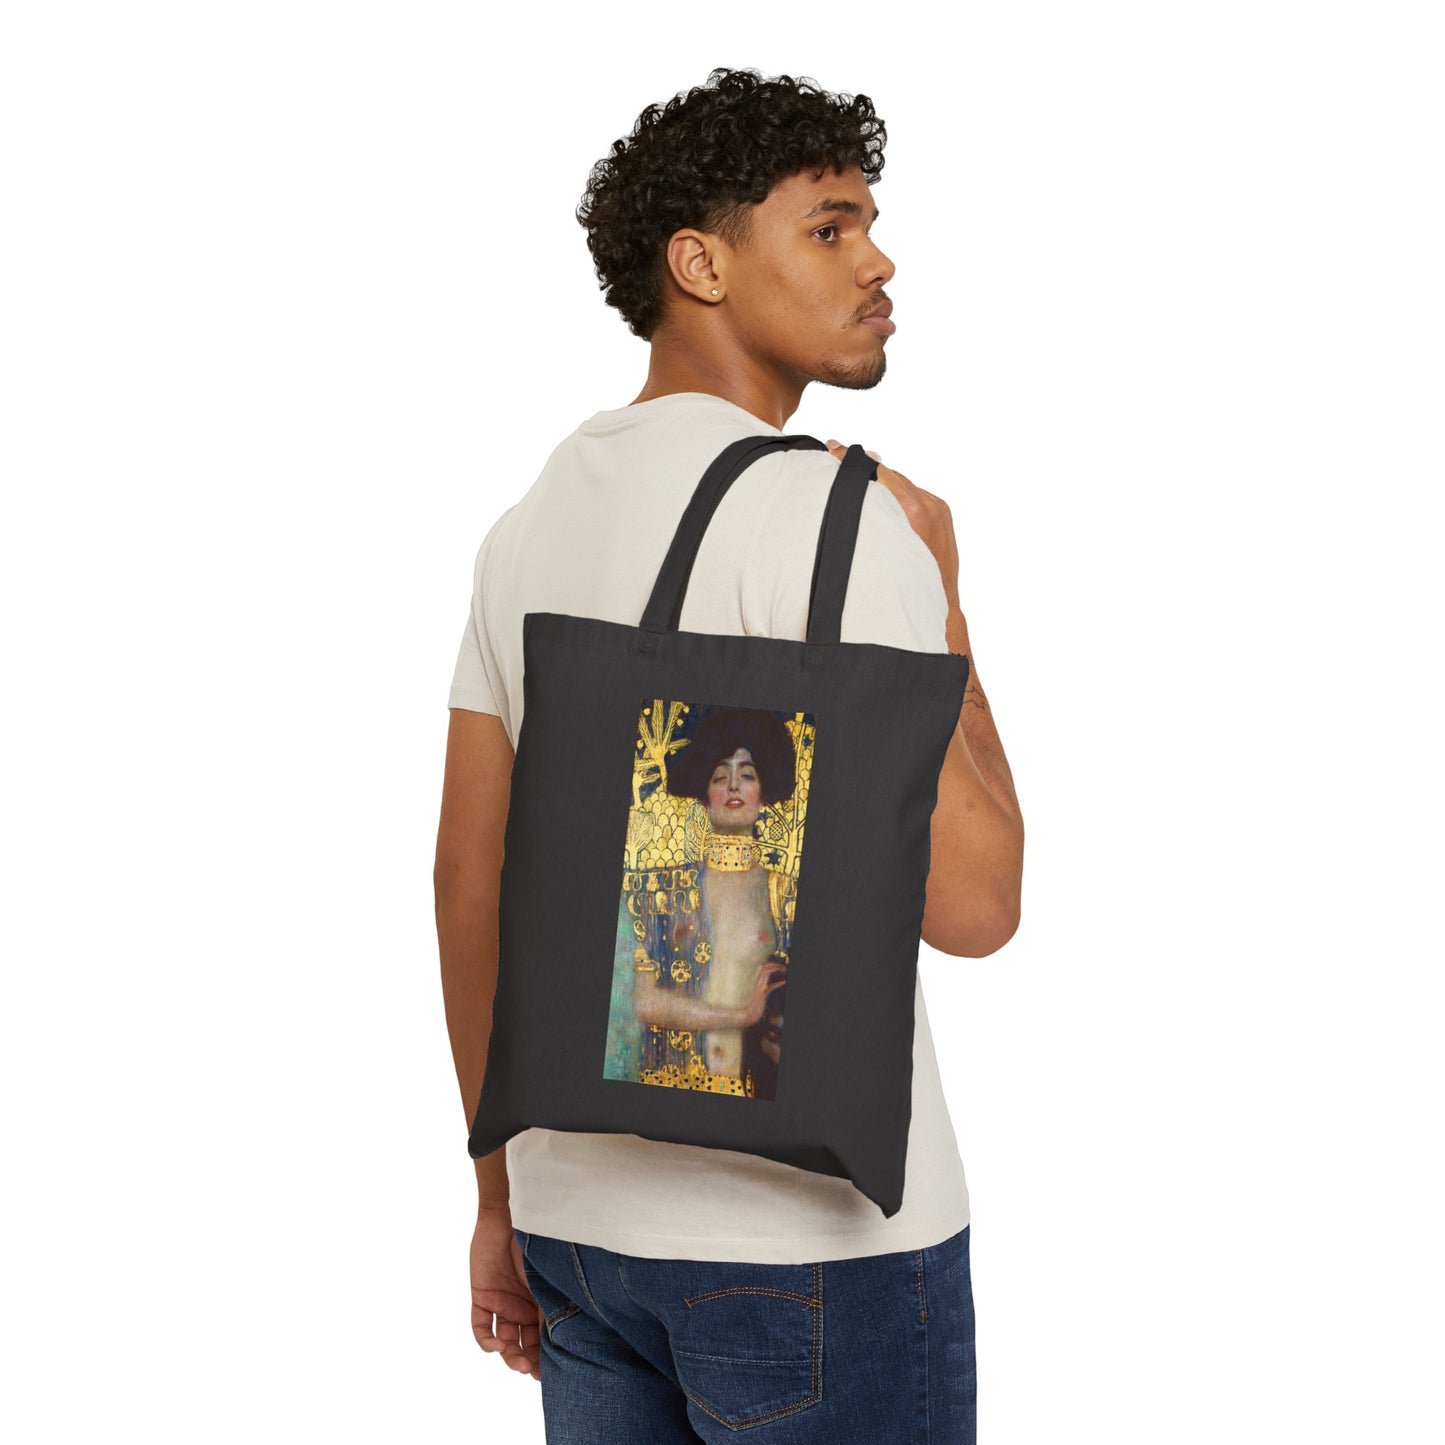 Judith and the Head of Holofernes Canvas Tote Bag